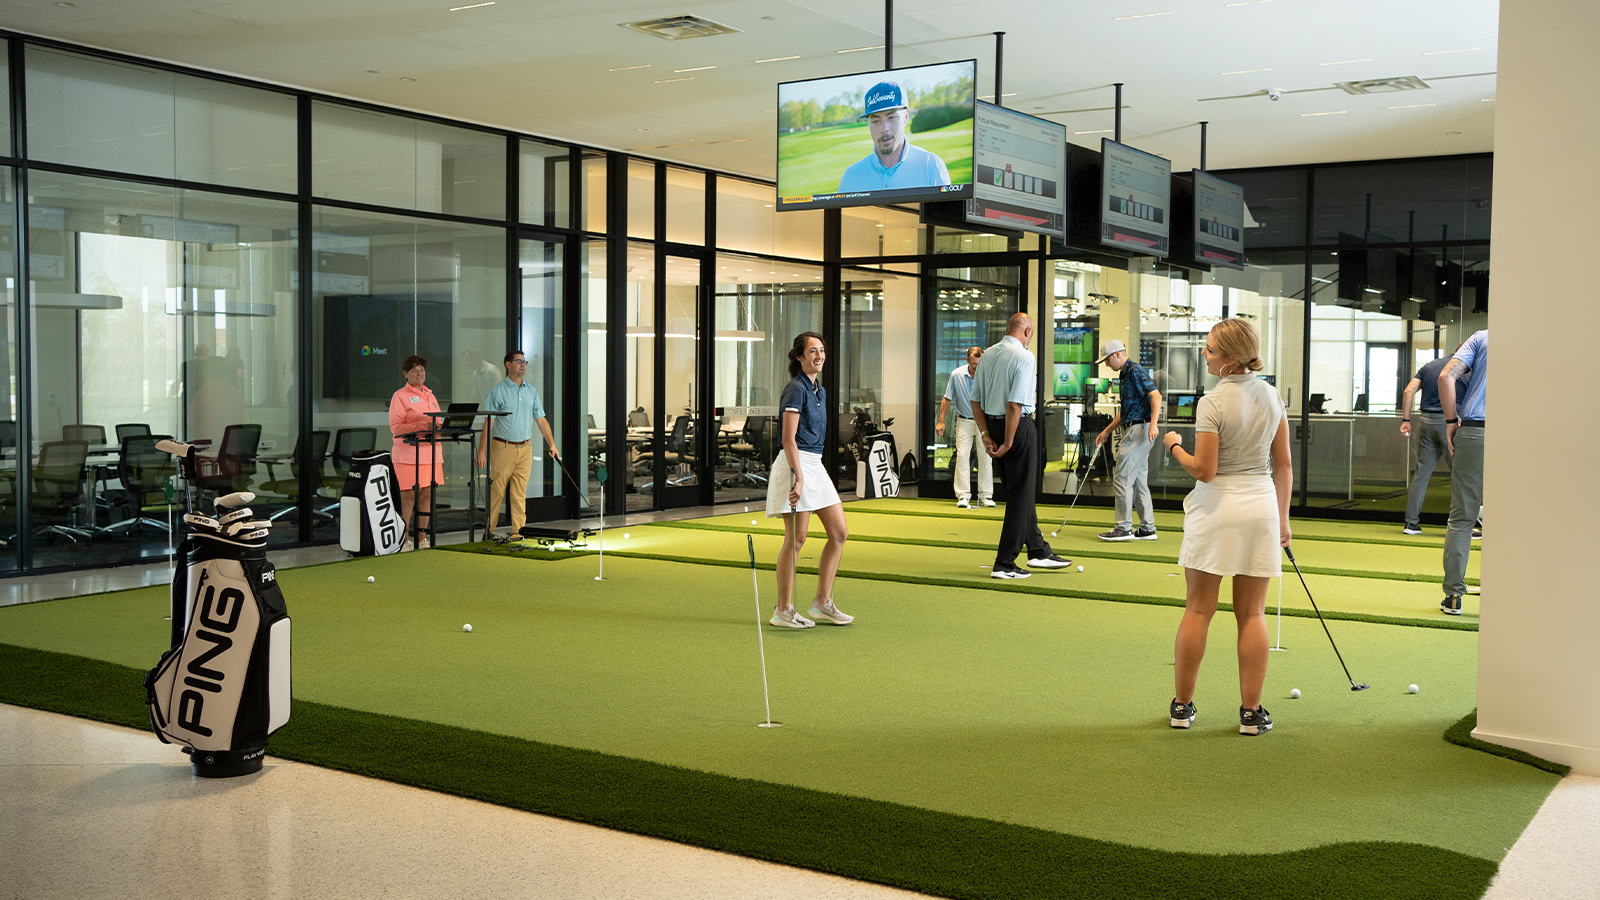 The putting green inside of the PGA Frisco Campus on August 17, 2022 in Frisco, Texas. (Photo by The Mamones LLC/PGA of America)